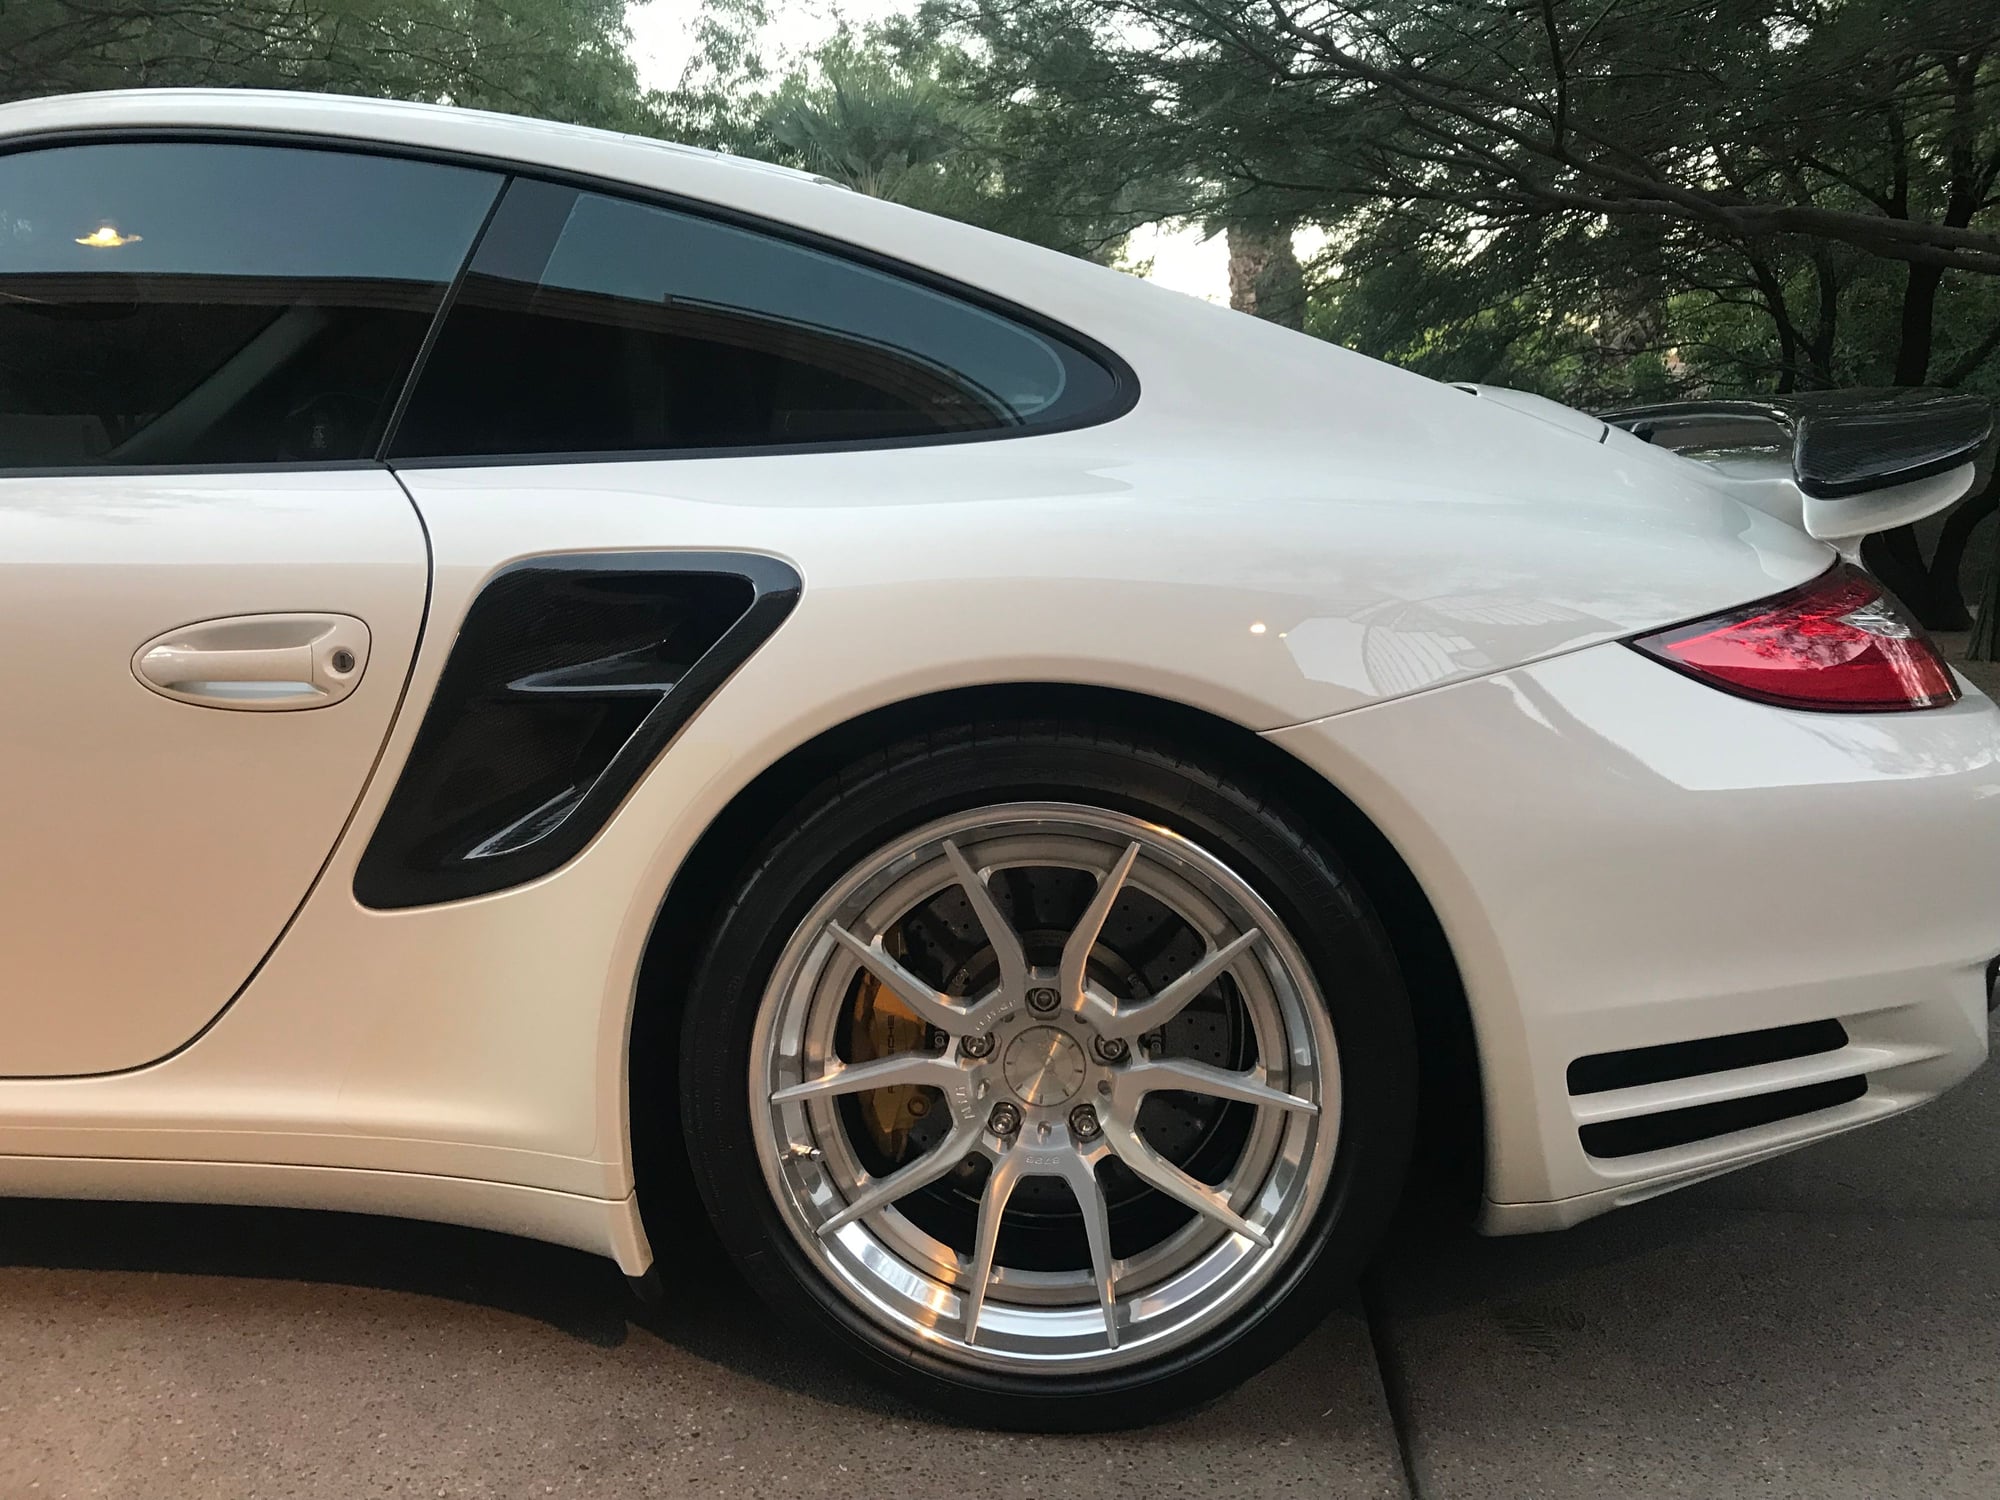 Wheels and Tires/Axles - Wheels for Sale ADV.1 - Used - 2005 to 2013 Porsche 911 - Paradise Valley, AZ 85253, United States